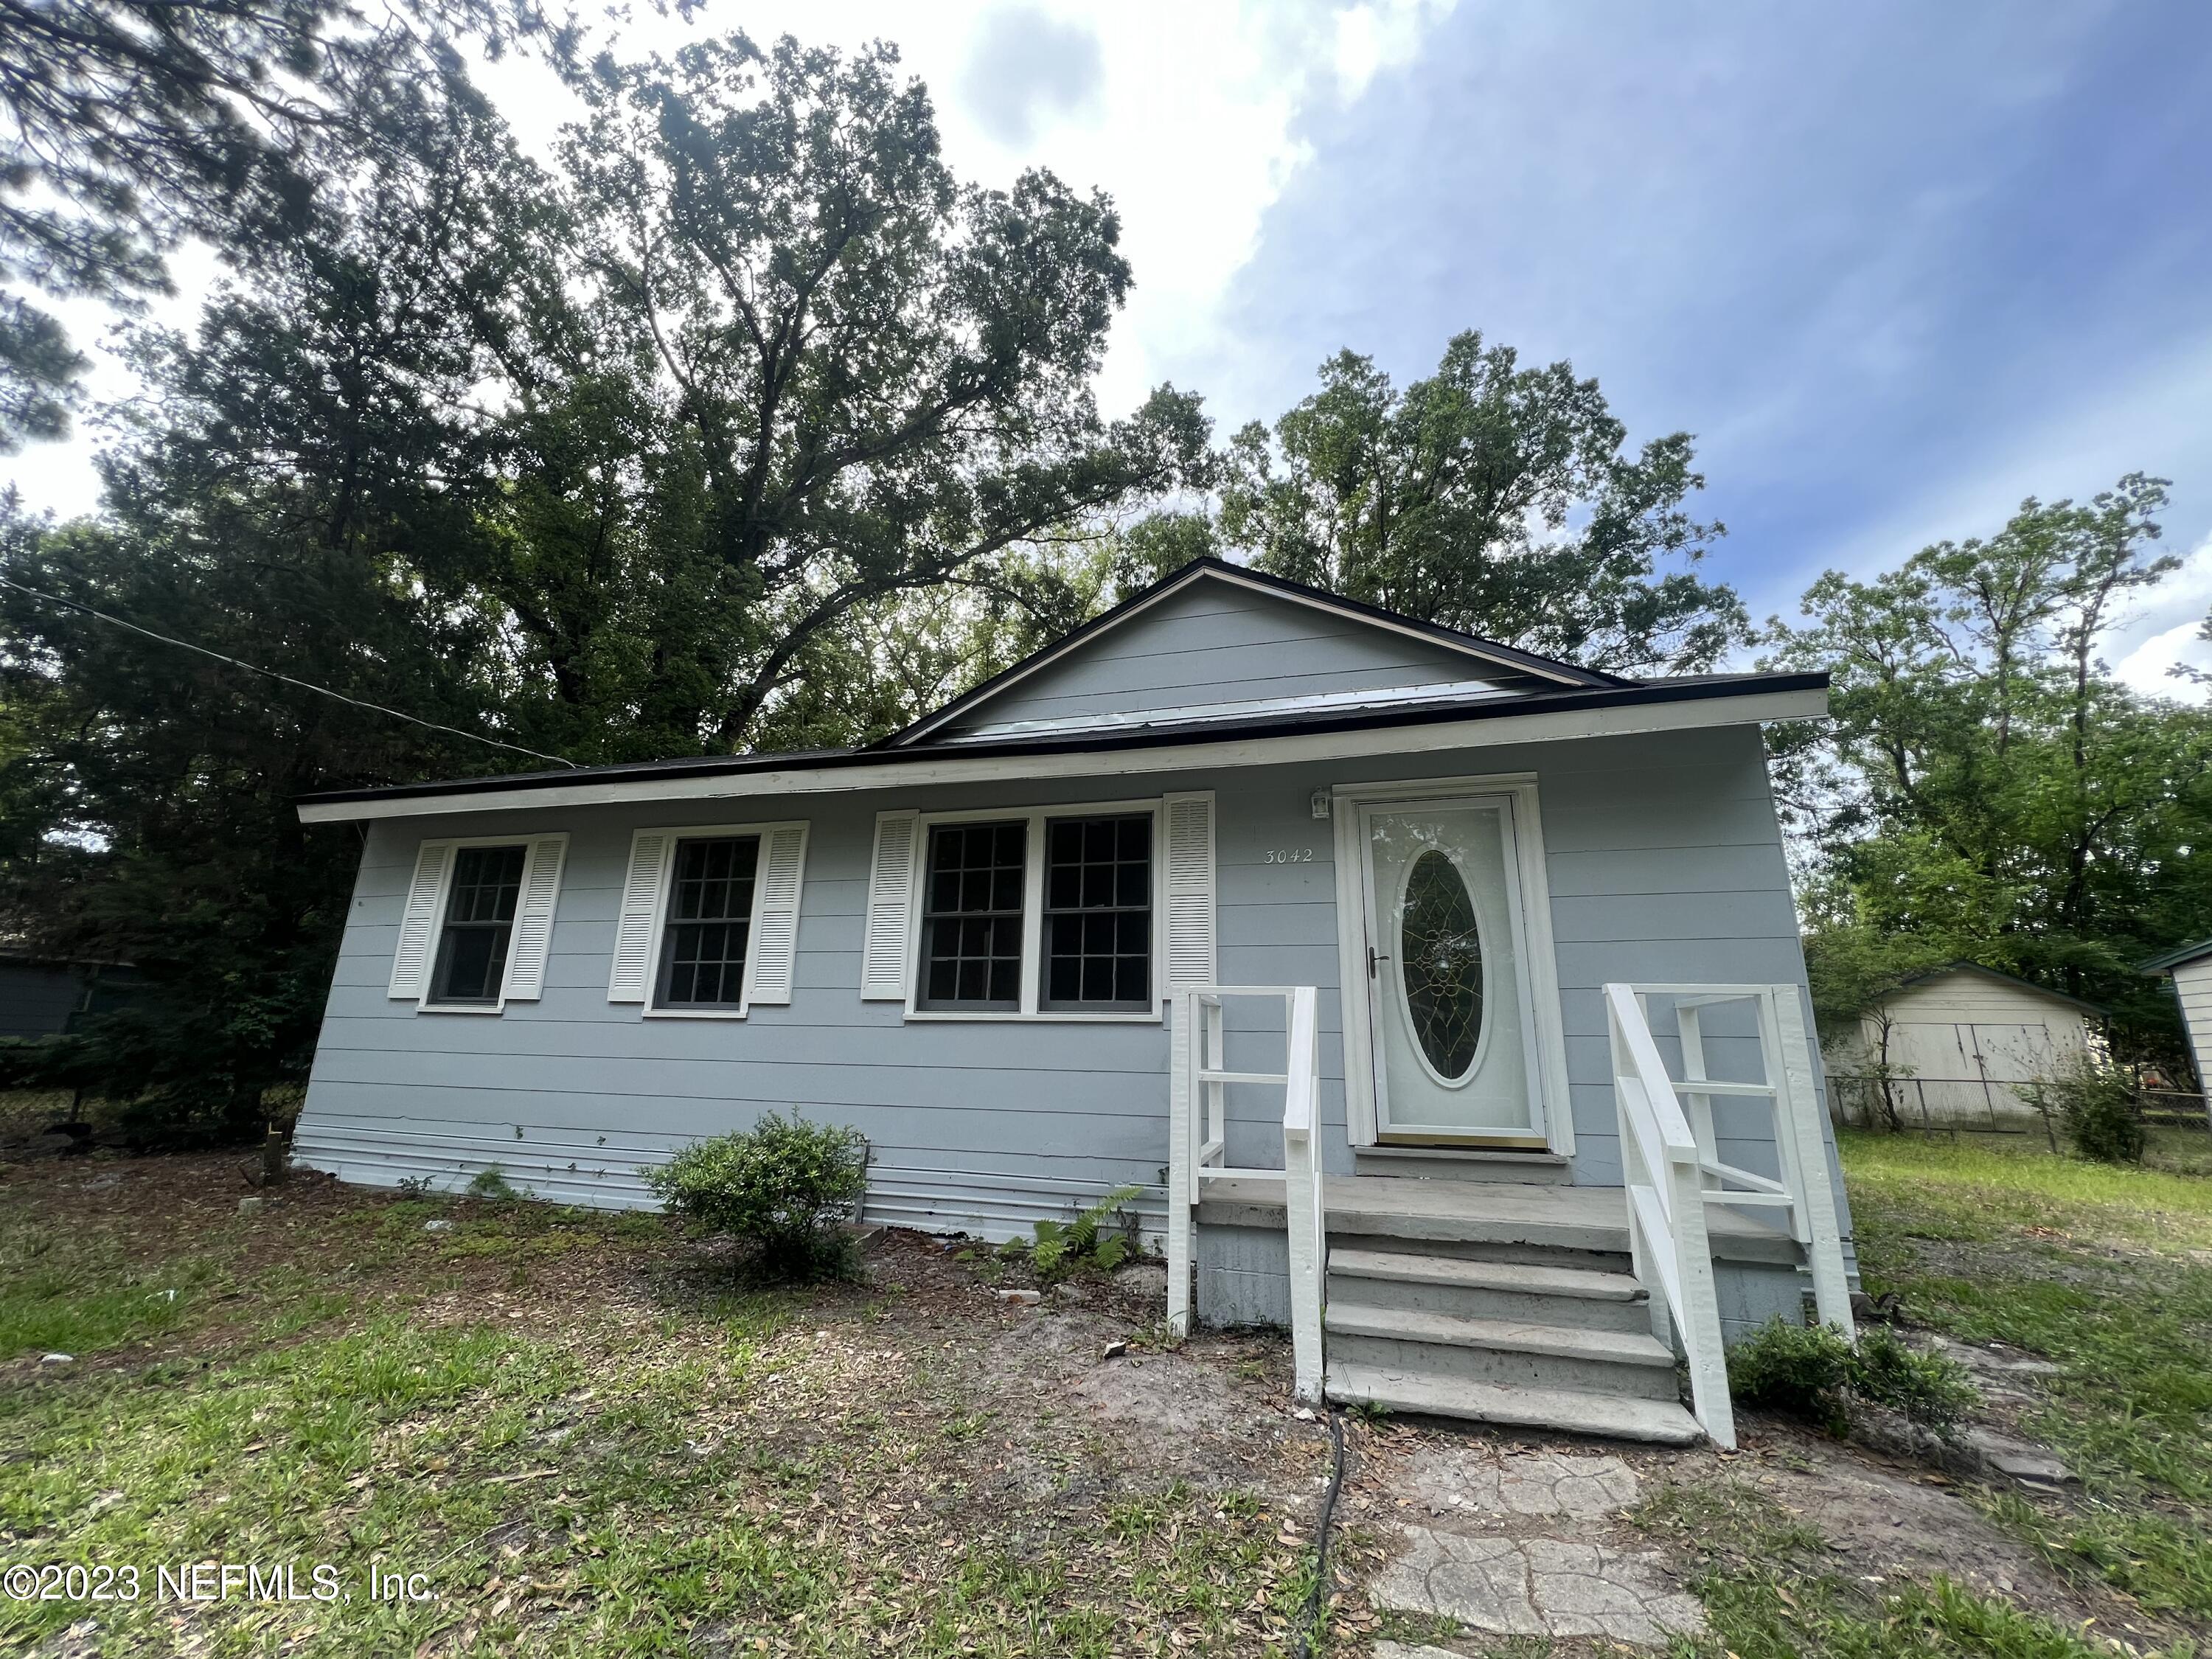 Jacksonville, FL home for sale located at 3042 4TH STREET Circle, Jacksonville, FL 32254